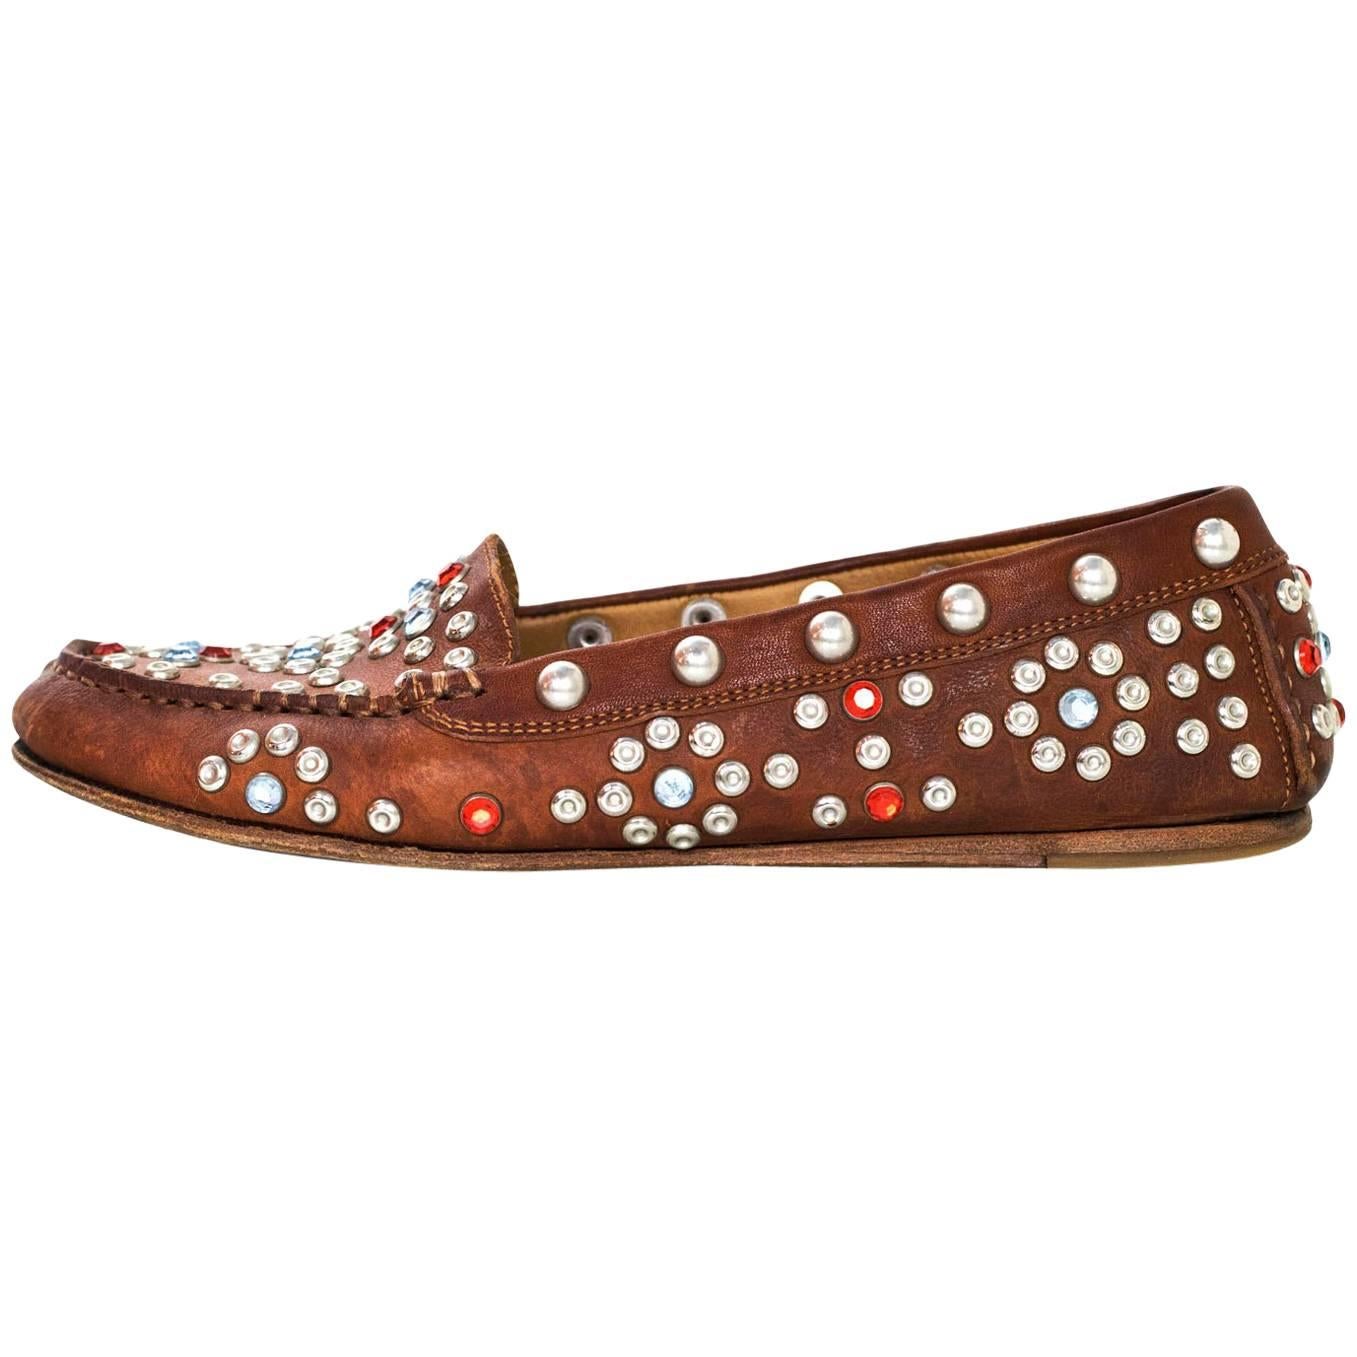 Isabel Marant Brown Studded Loafers Sz 40